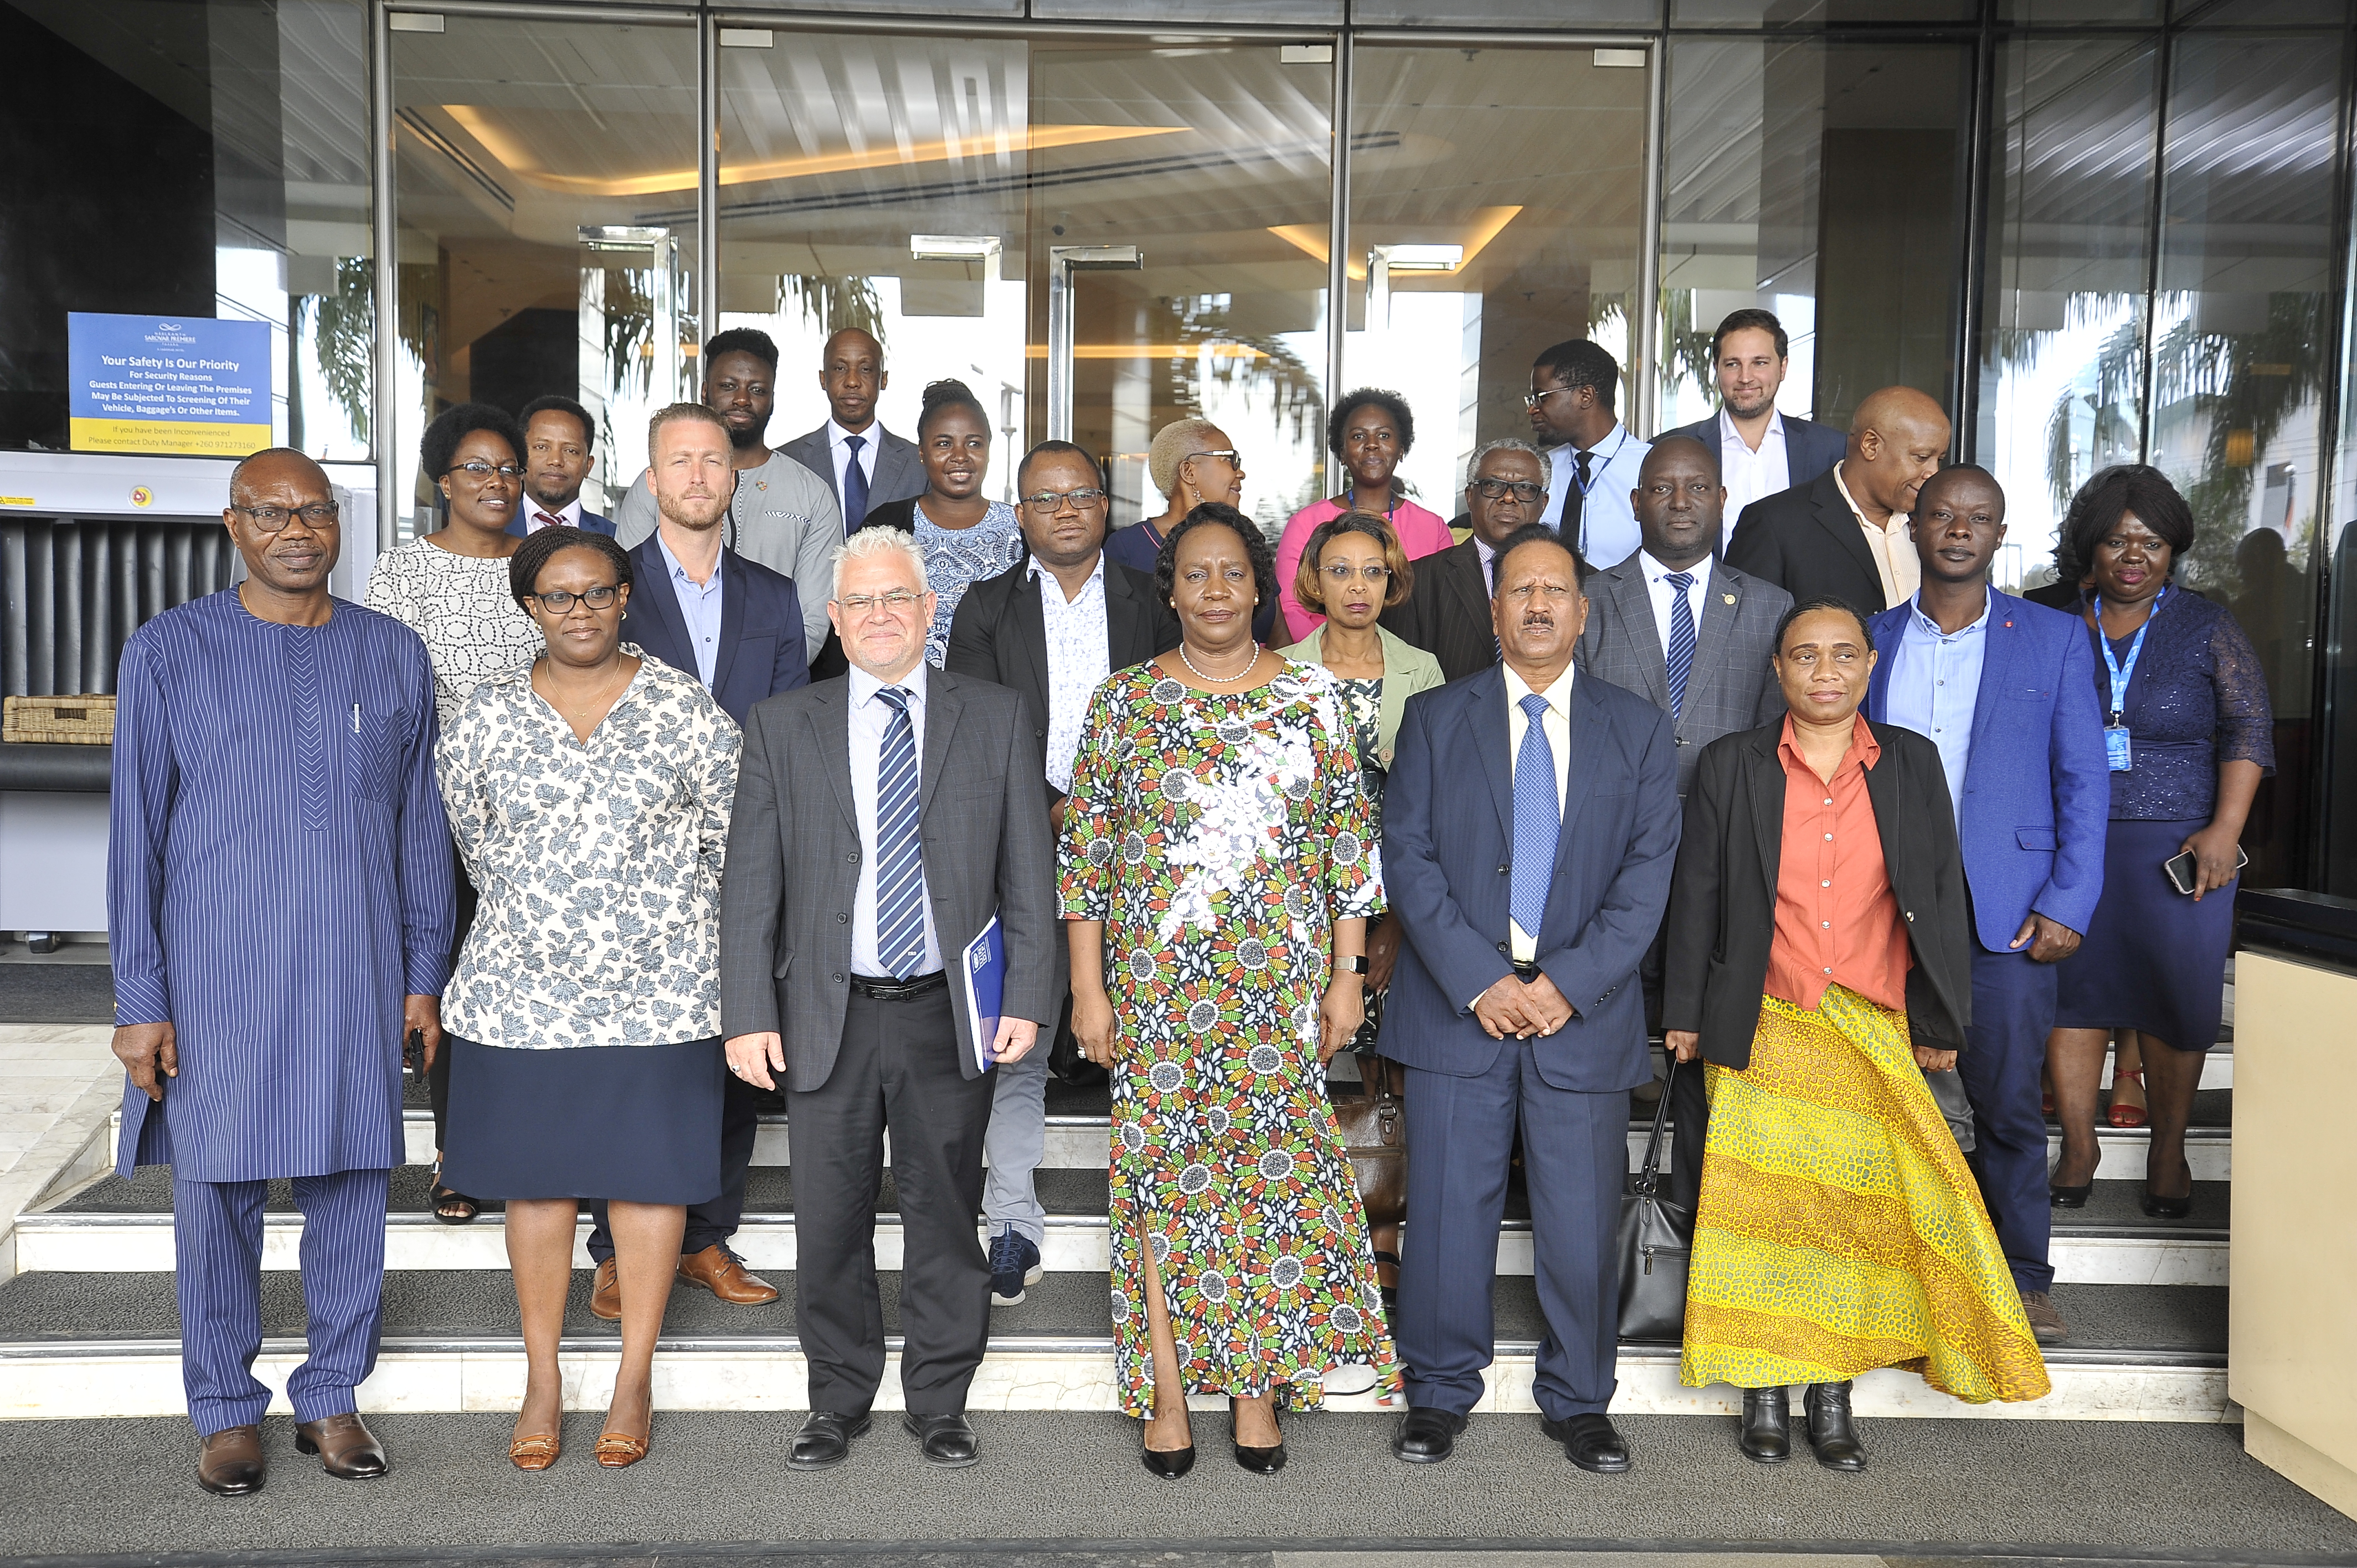 A group photo of the COMESA Secretary General, Her Excellency Chileshe Kapwepwe (Centre), UNDP Zambia Resident Representative, Lionel Laurens (Centre Left), and COMESA Assistant Secretary General, Dr Dave Haman (Centre Right) with participants at the COMESA-UNDP Partnerships Dialogue